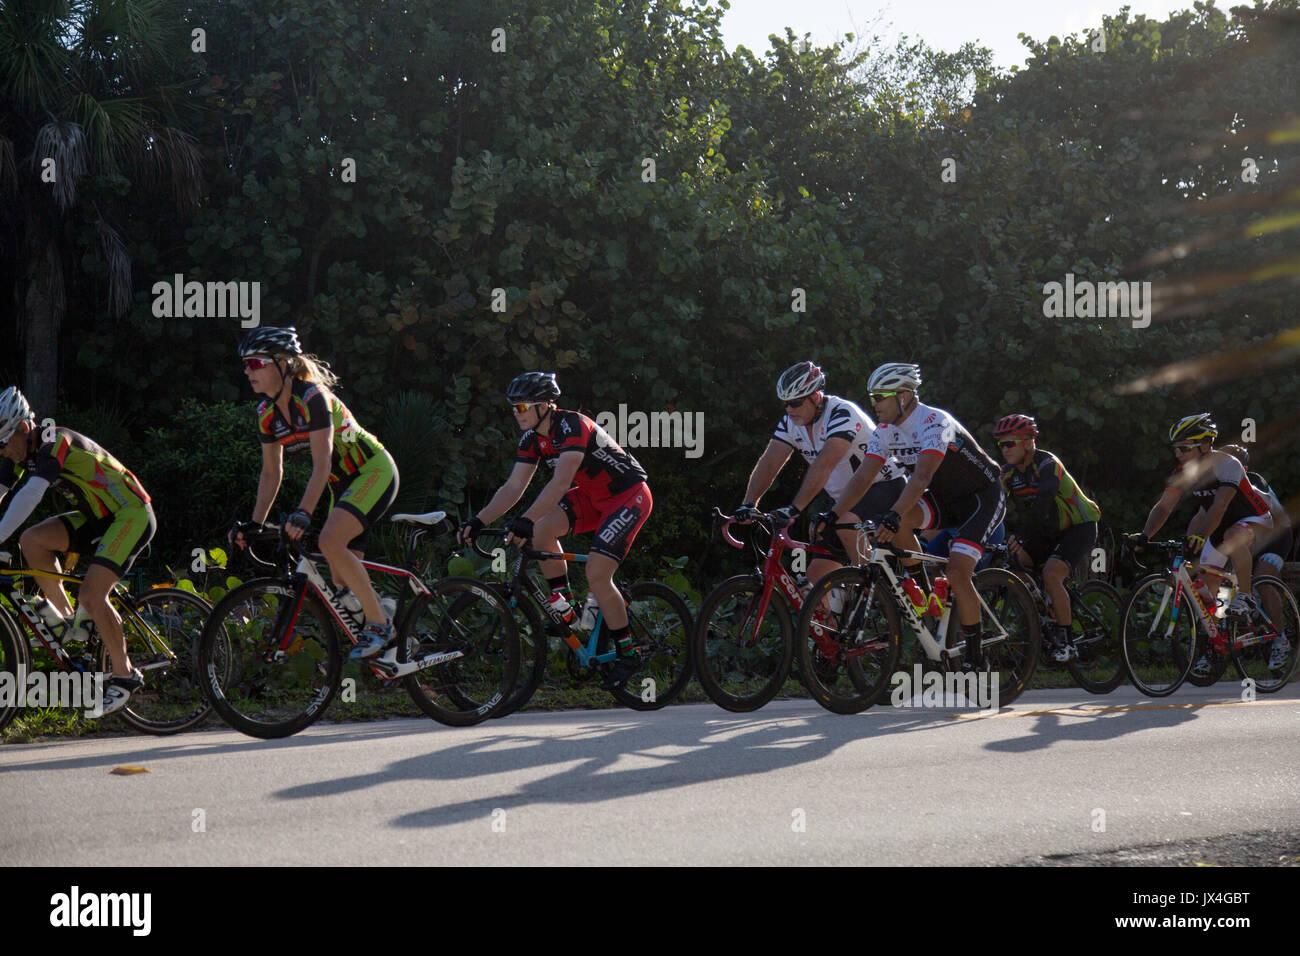 Cyclists riding in a group. Stock Photo